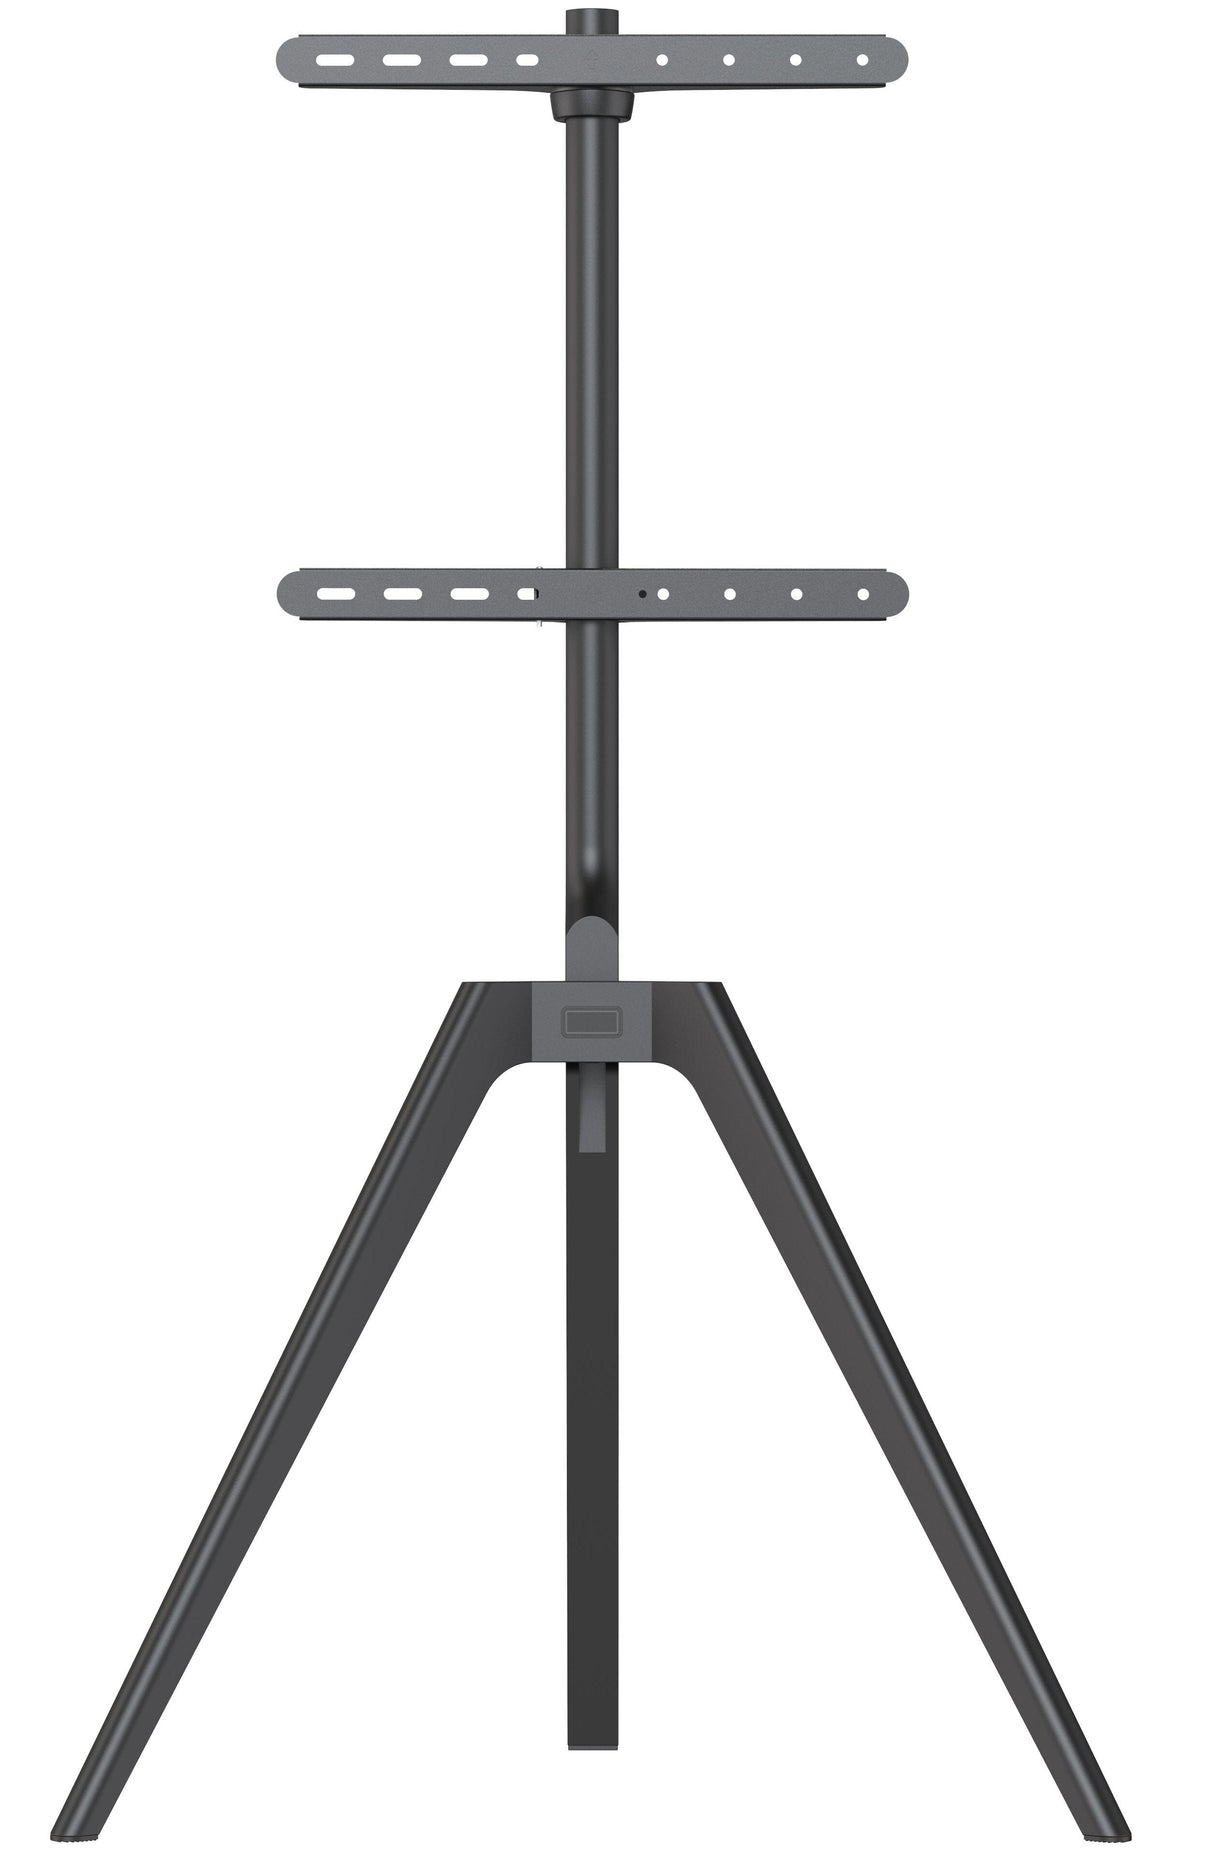 TTAP Tripod Black TV Stand with Swivel for up to 65" TVs